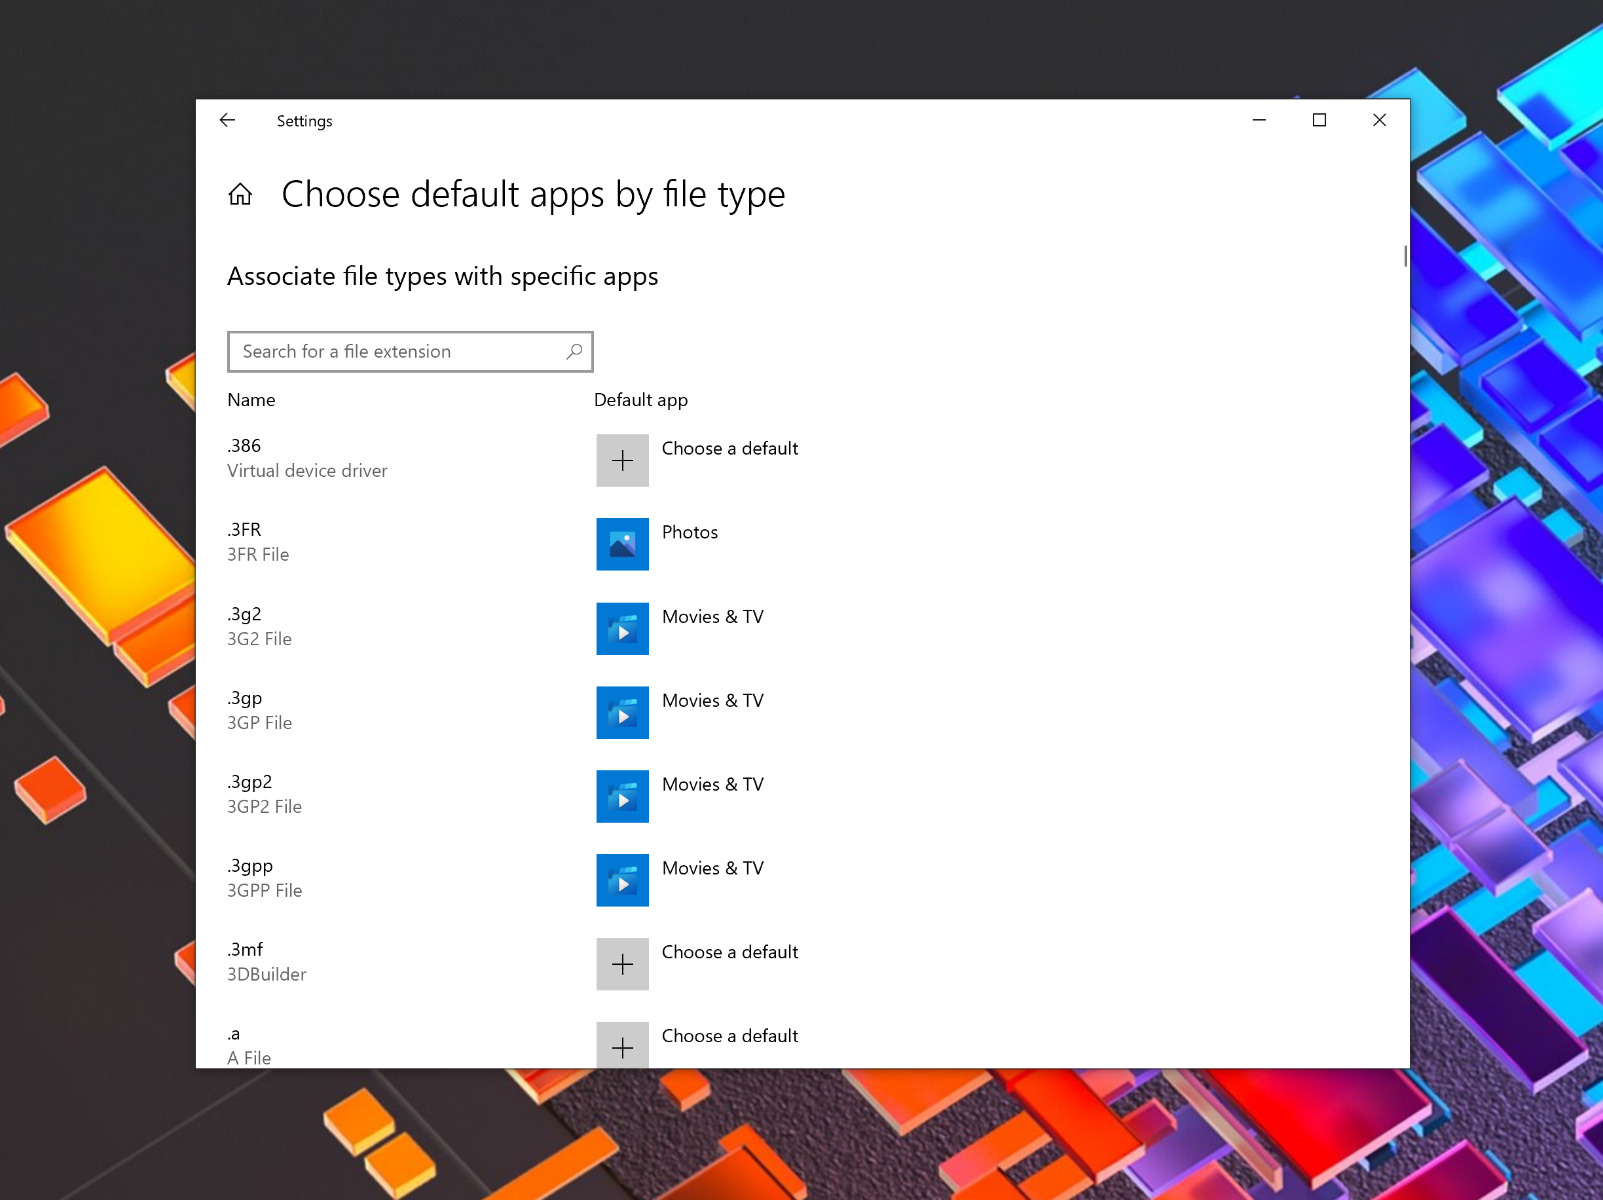 Windows Insider Update 20211 Brings Default App Search And Linux File System Access